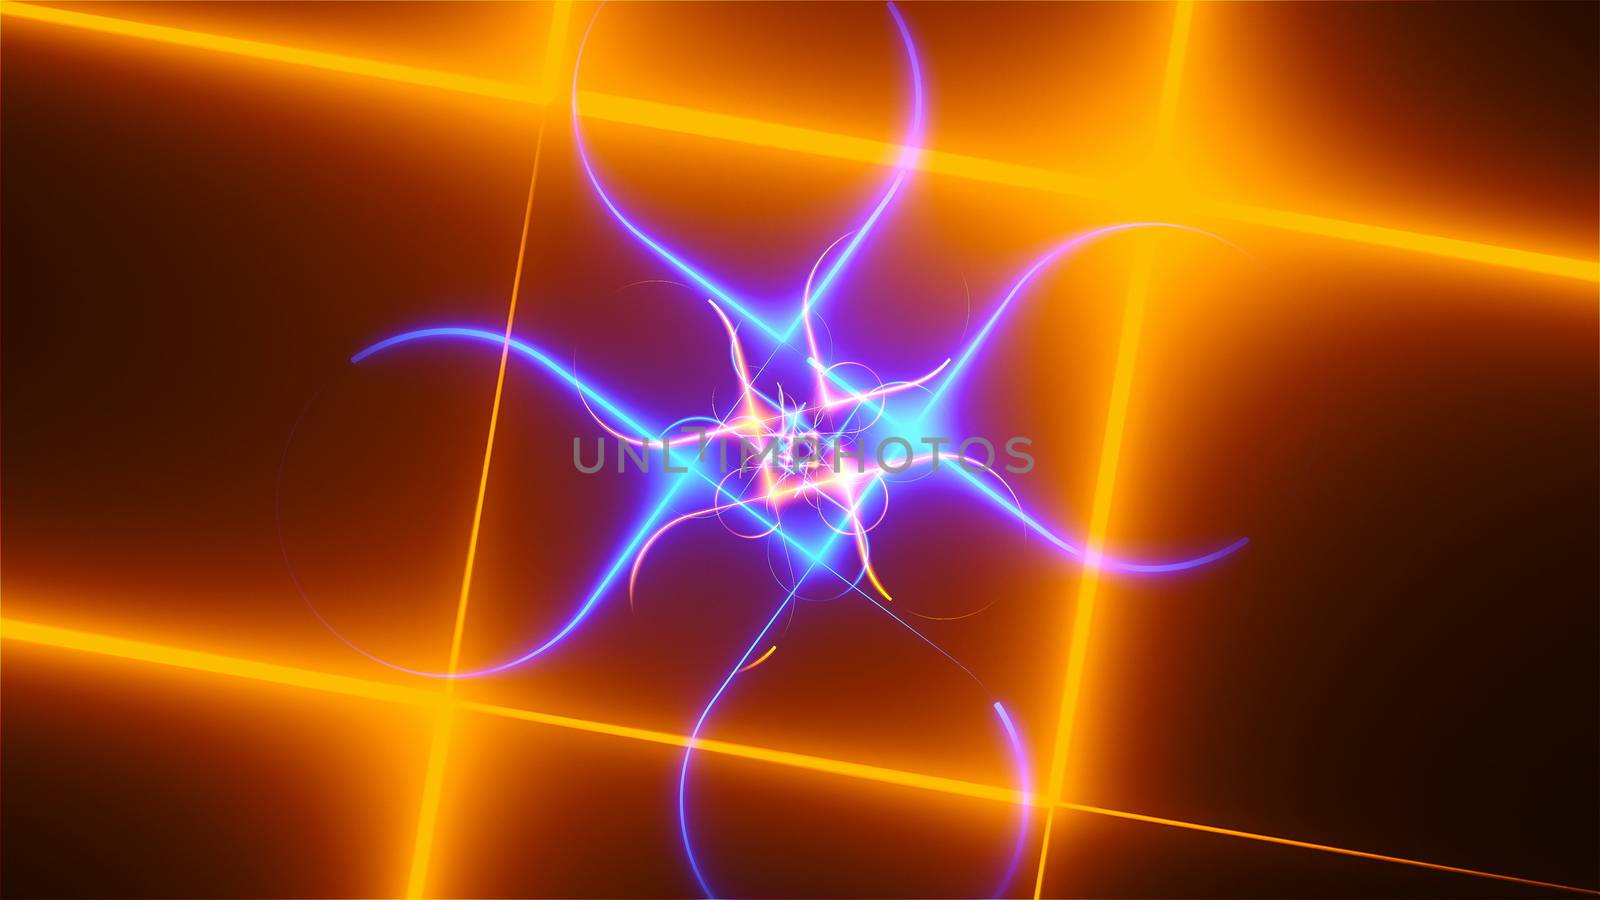 Neon composition with bright shapes like neon tunnel is in the dark space, 3d rendering computer generated background